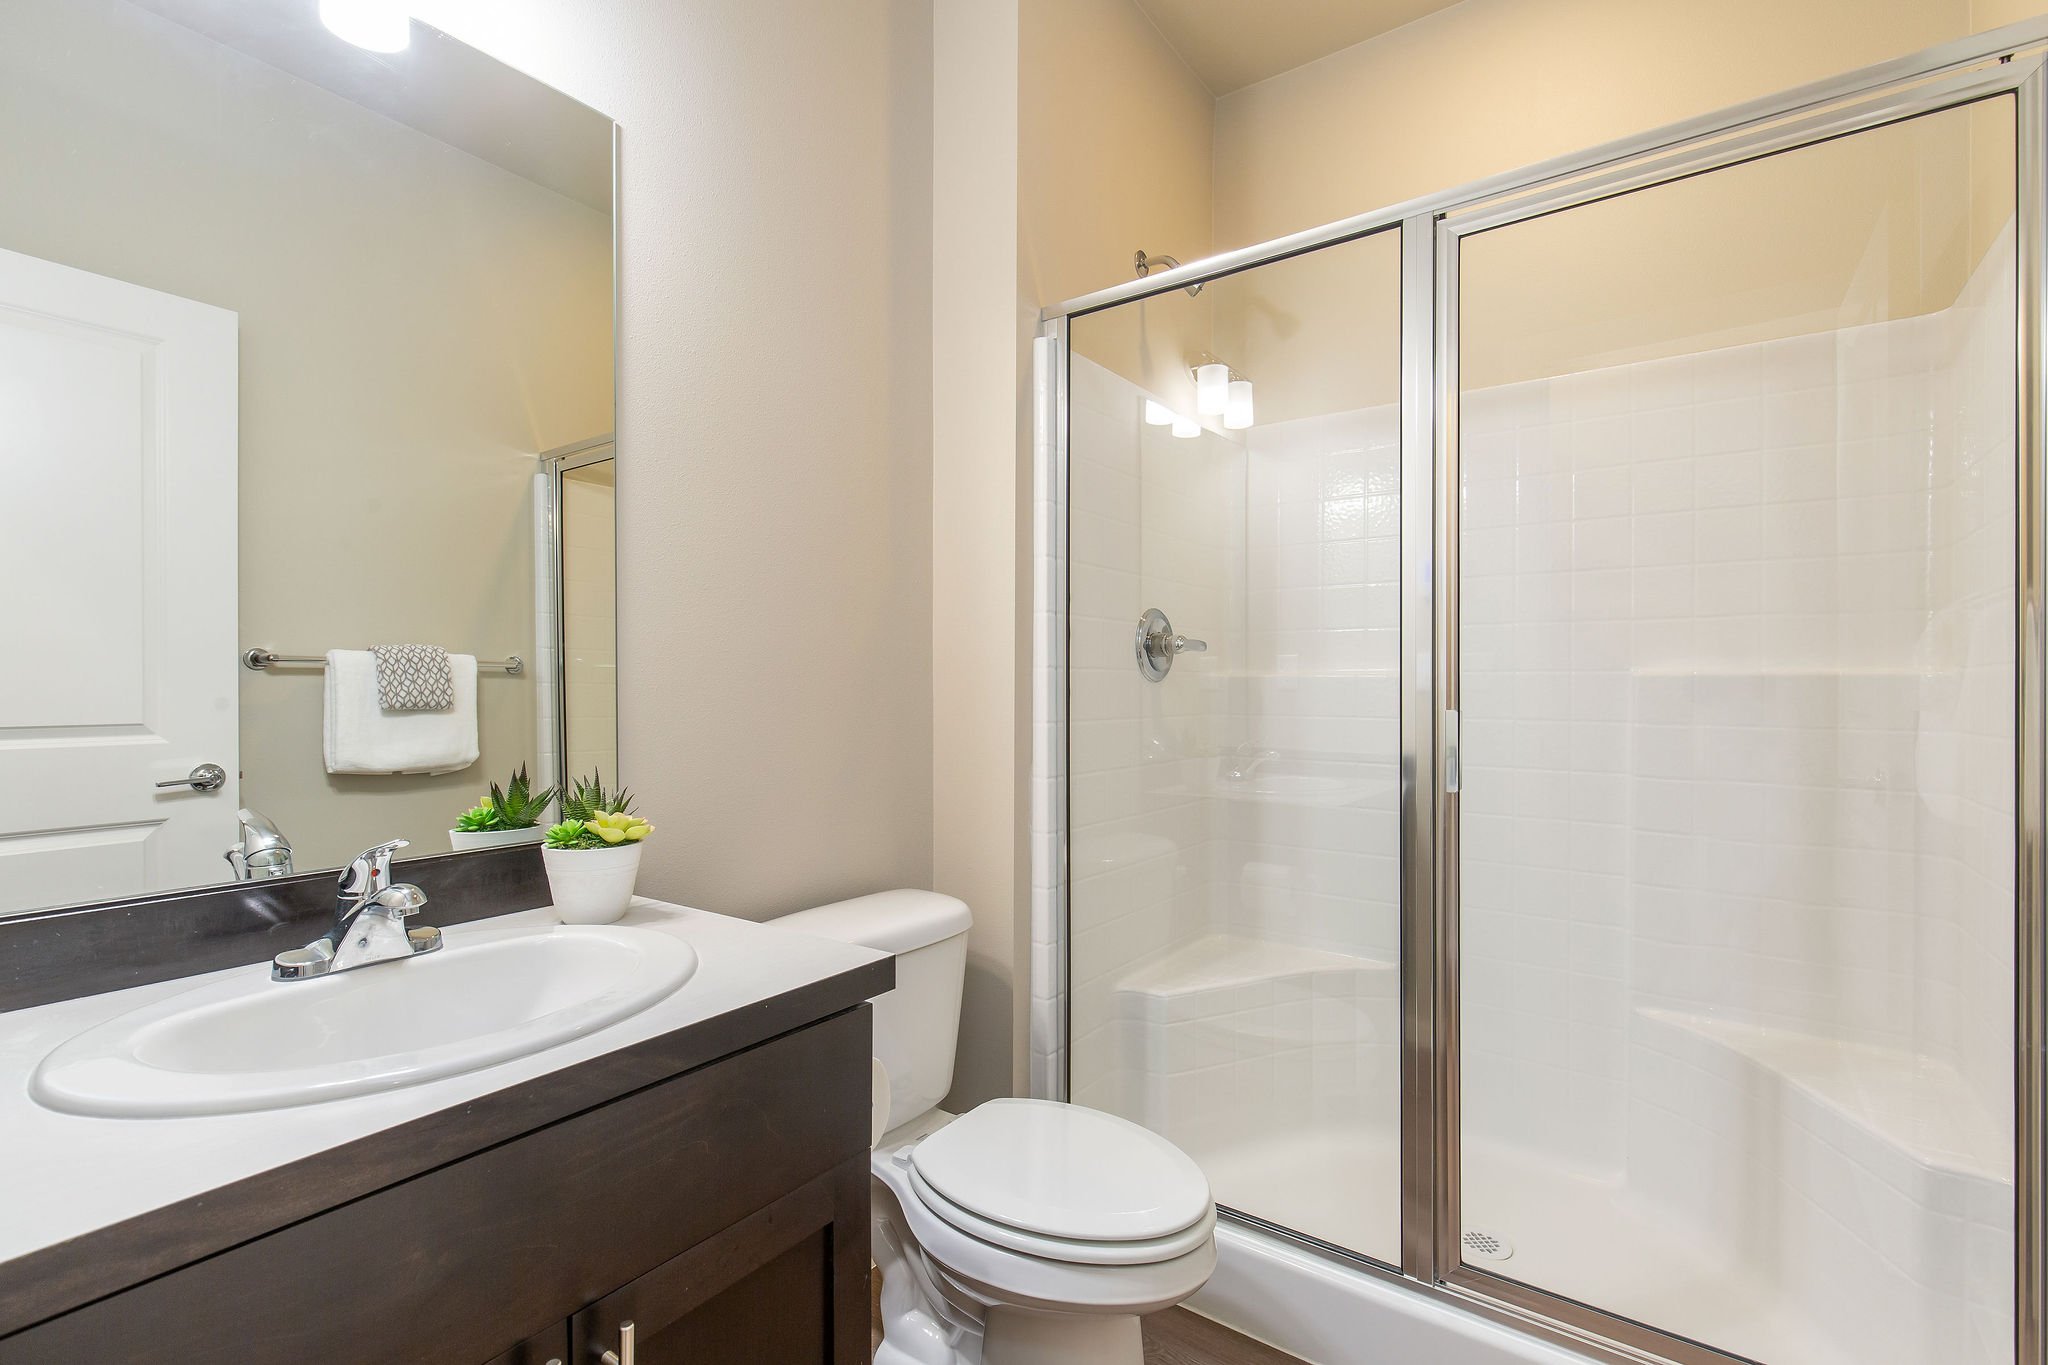  image description: interior of master bathroom with 2 sinks and walk in shower 